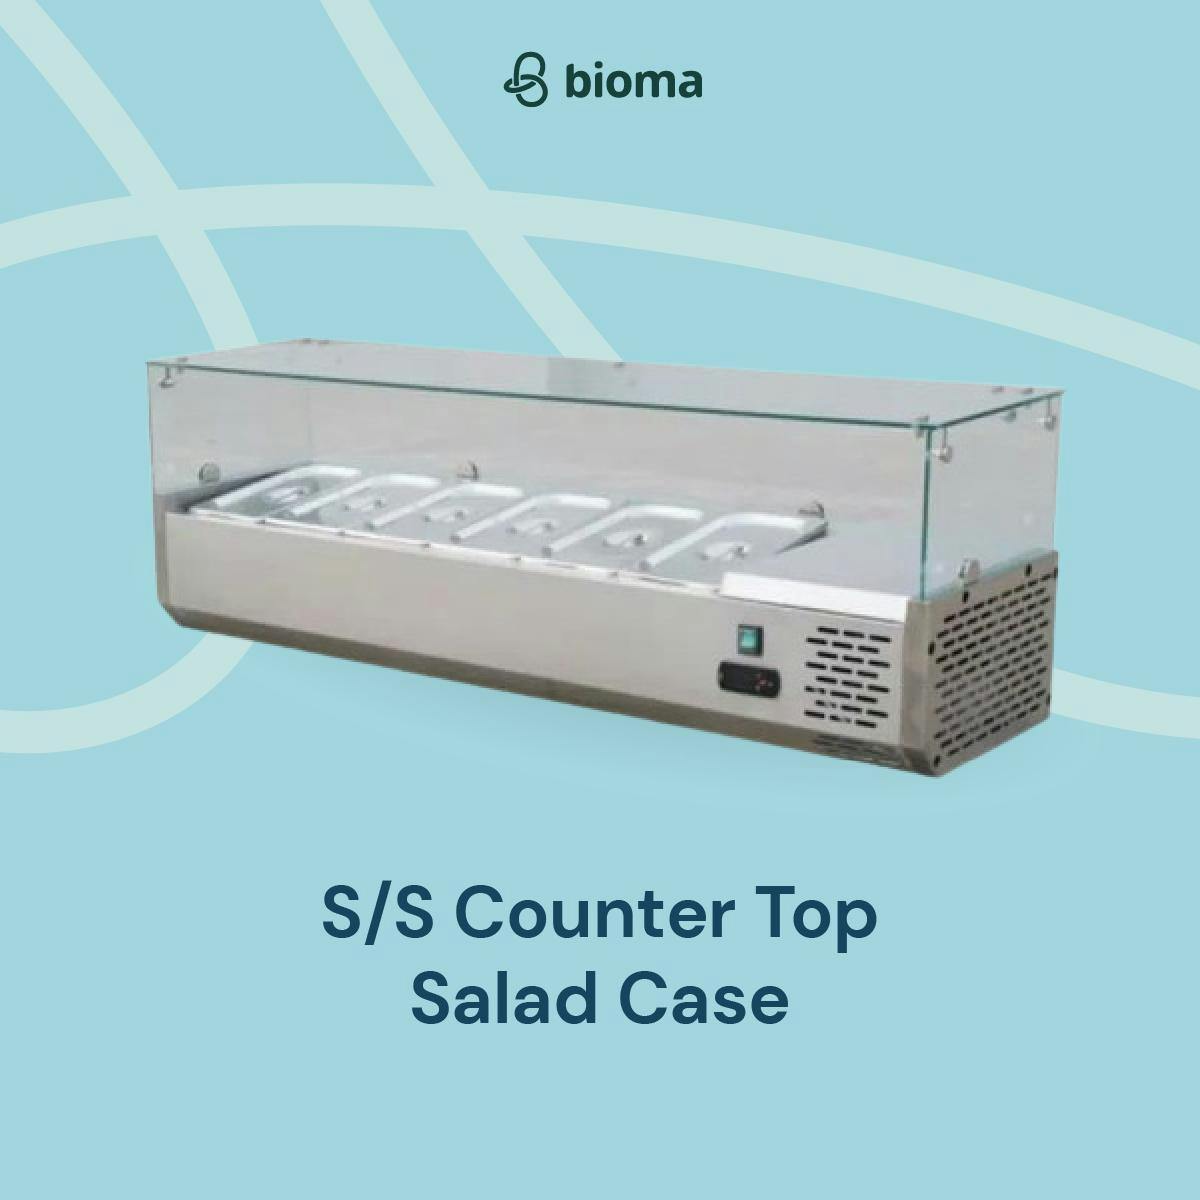 S/S Counter Top Salad Case